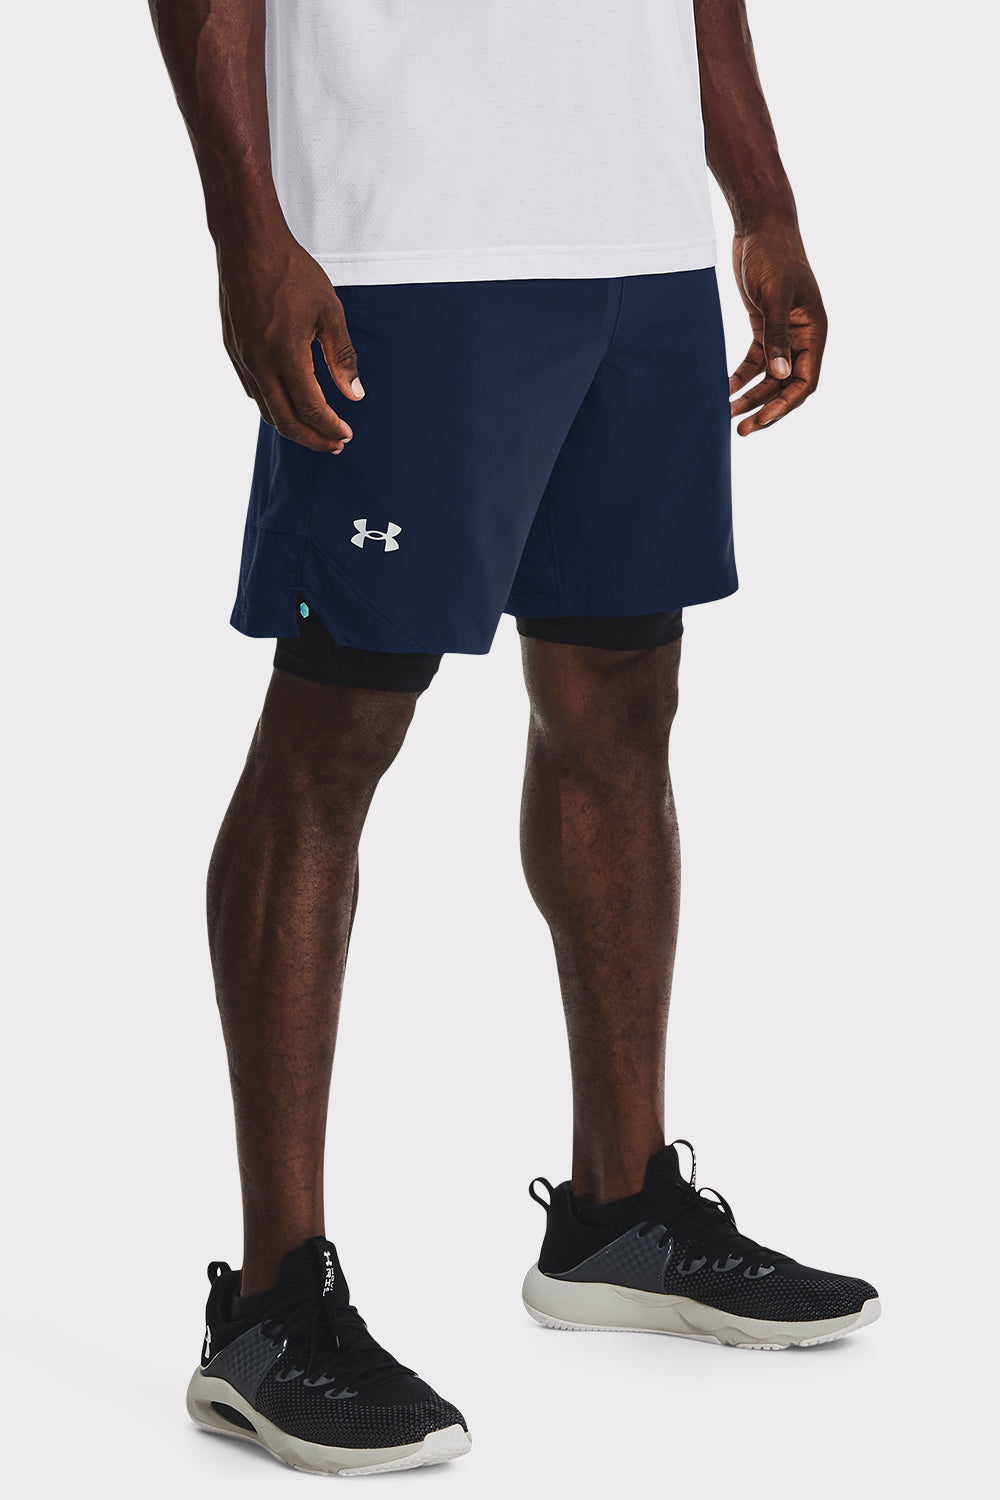 Under Armour UA Vanish Woven 8in Shorts - Academy Blue / MD Shorts